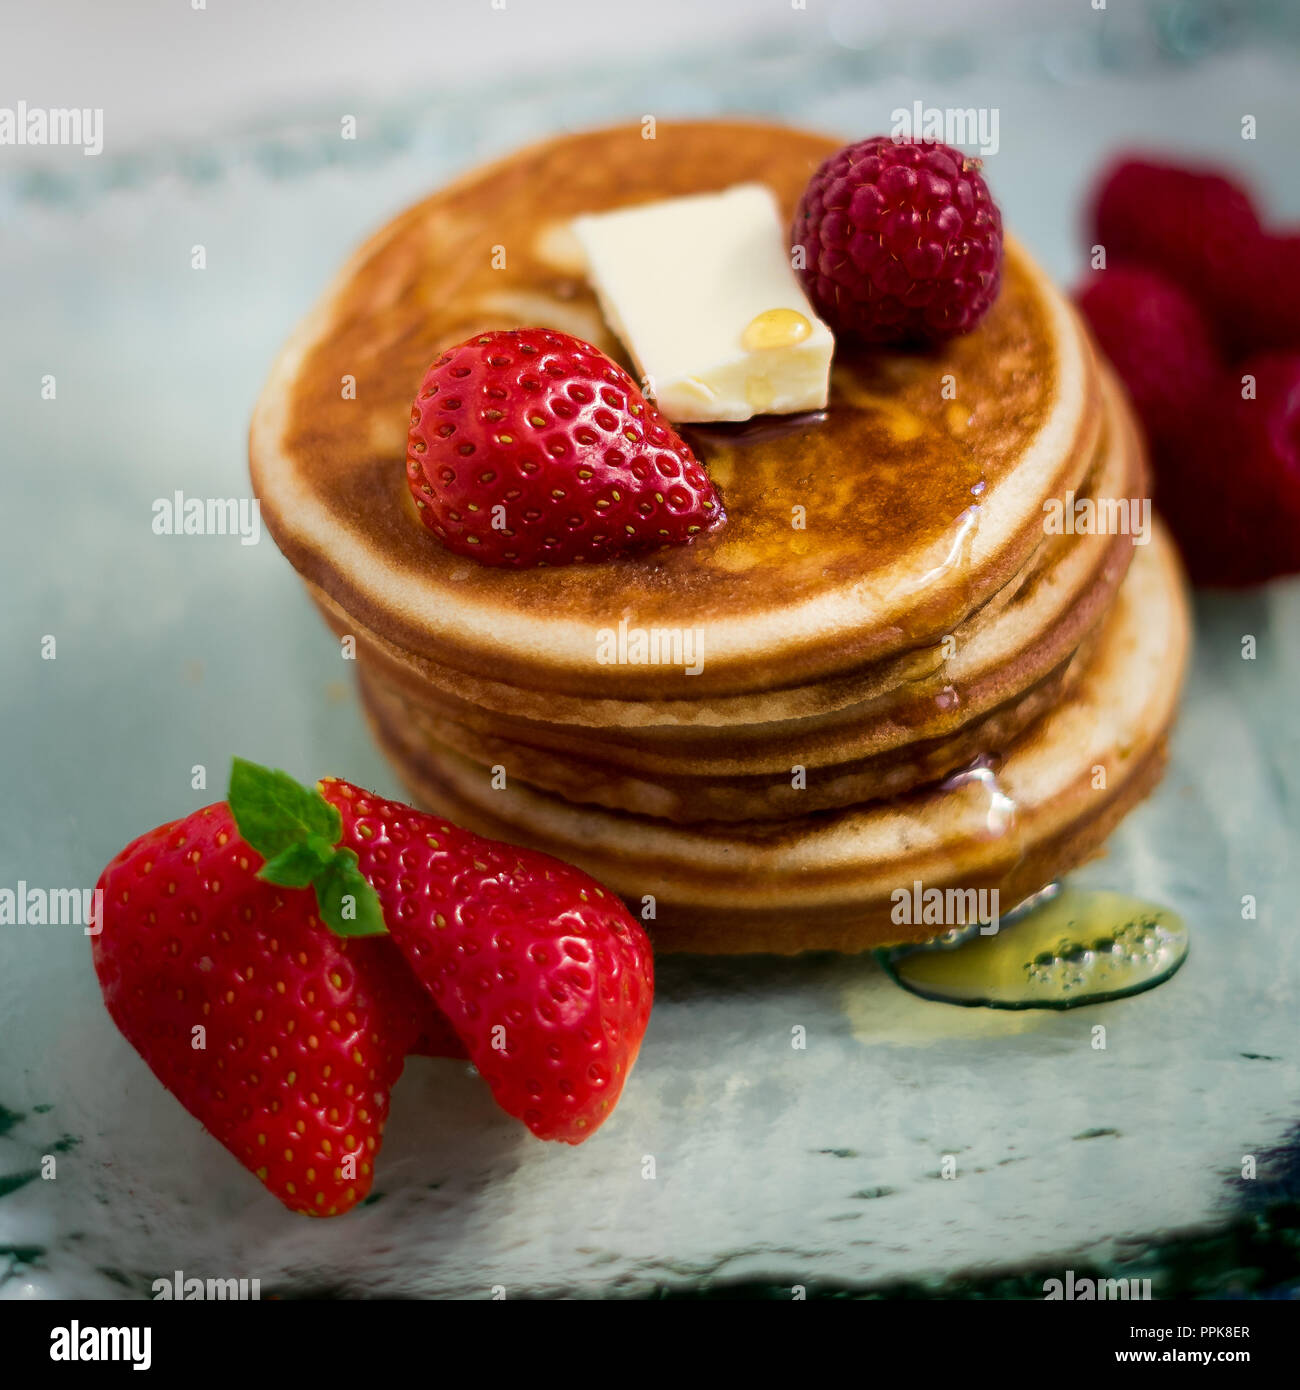 American style pancakes with maple syrup and fruits Stock Photo